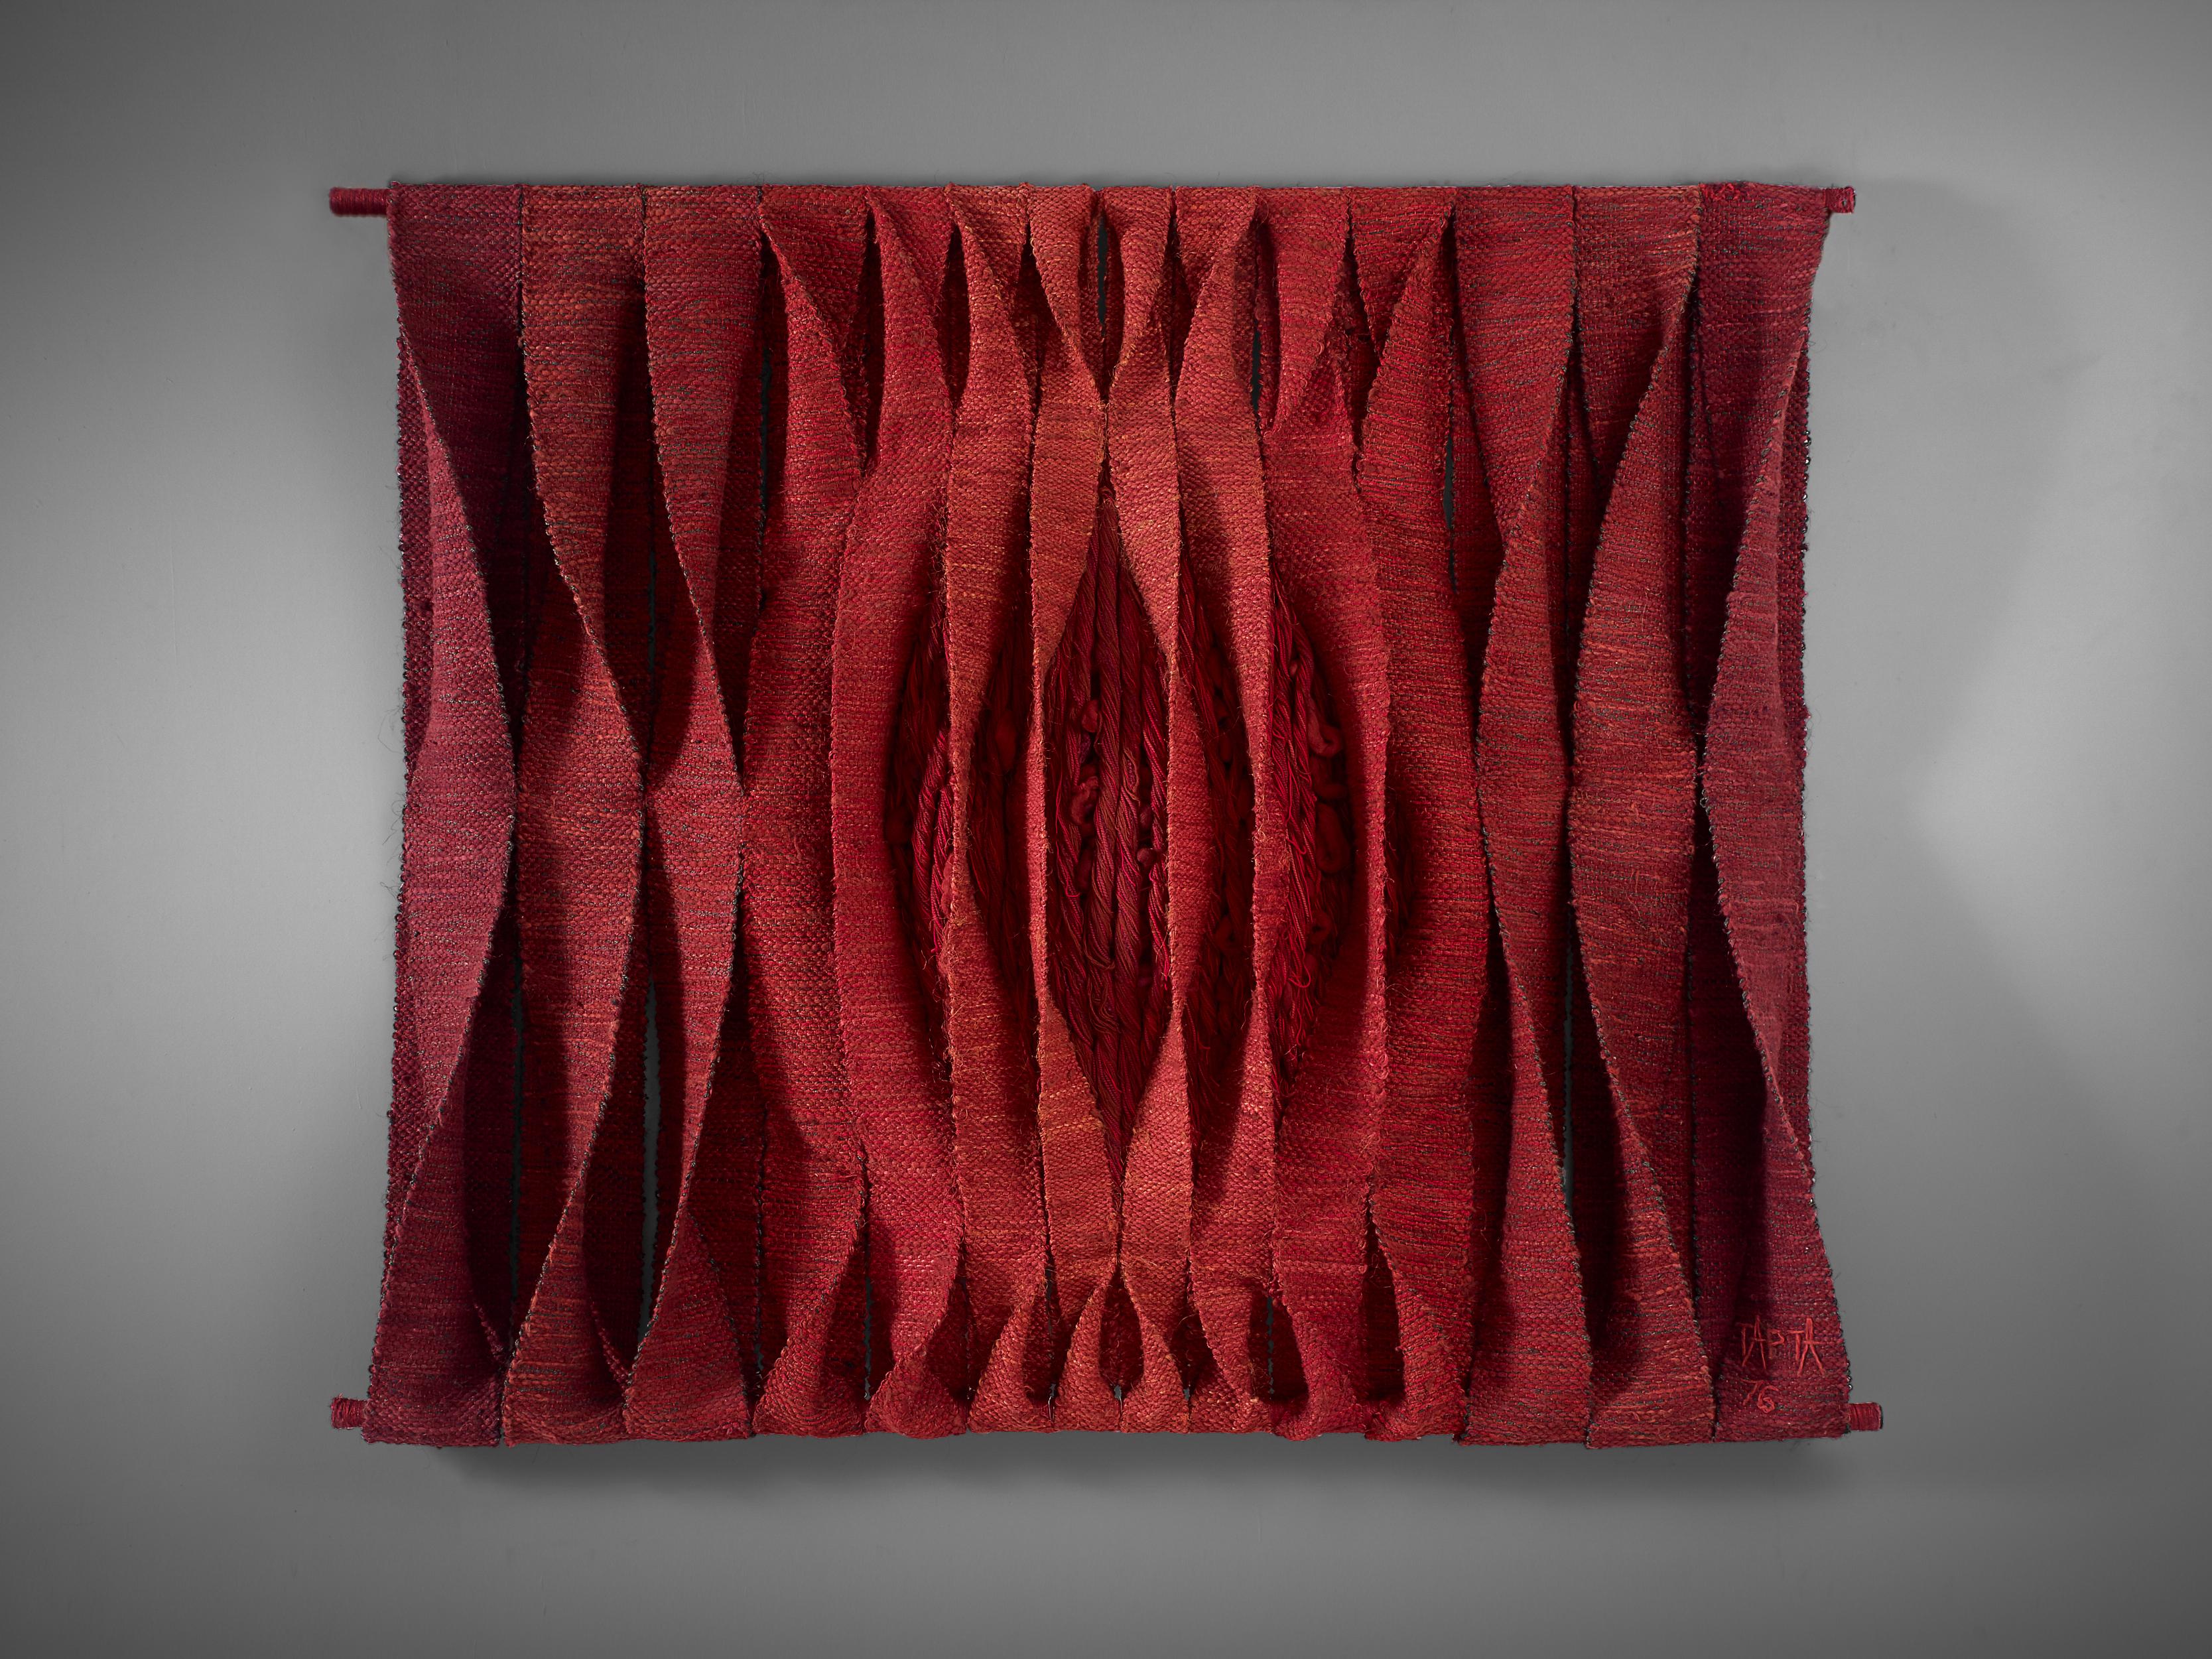 Maria Tapta, wall hanging, mixed textiles, Belgium, 1976

Large wall sculpture in divers textiles and mixed techniques. Several strokes of red textile are hanging from a horizontal bar. Following Tapta’s interest between gravity and threads, the